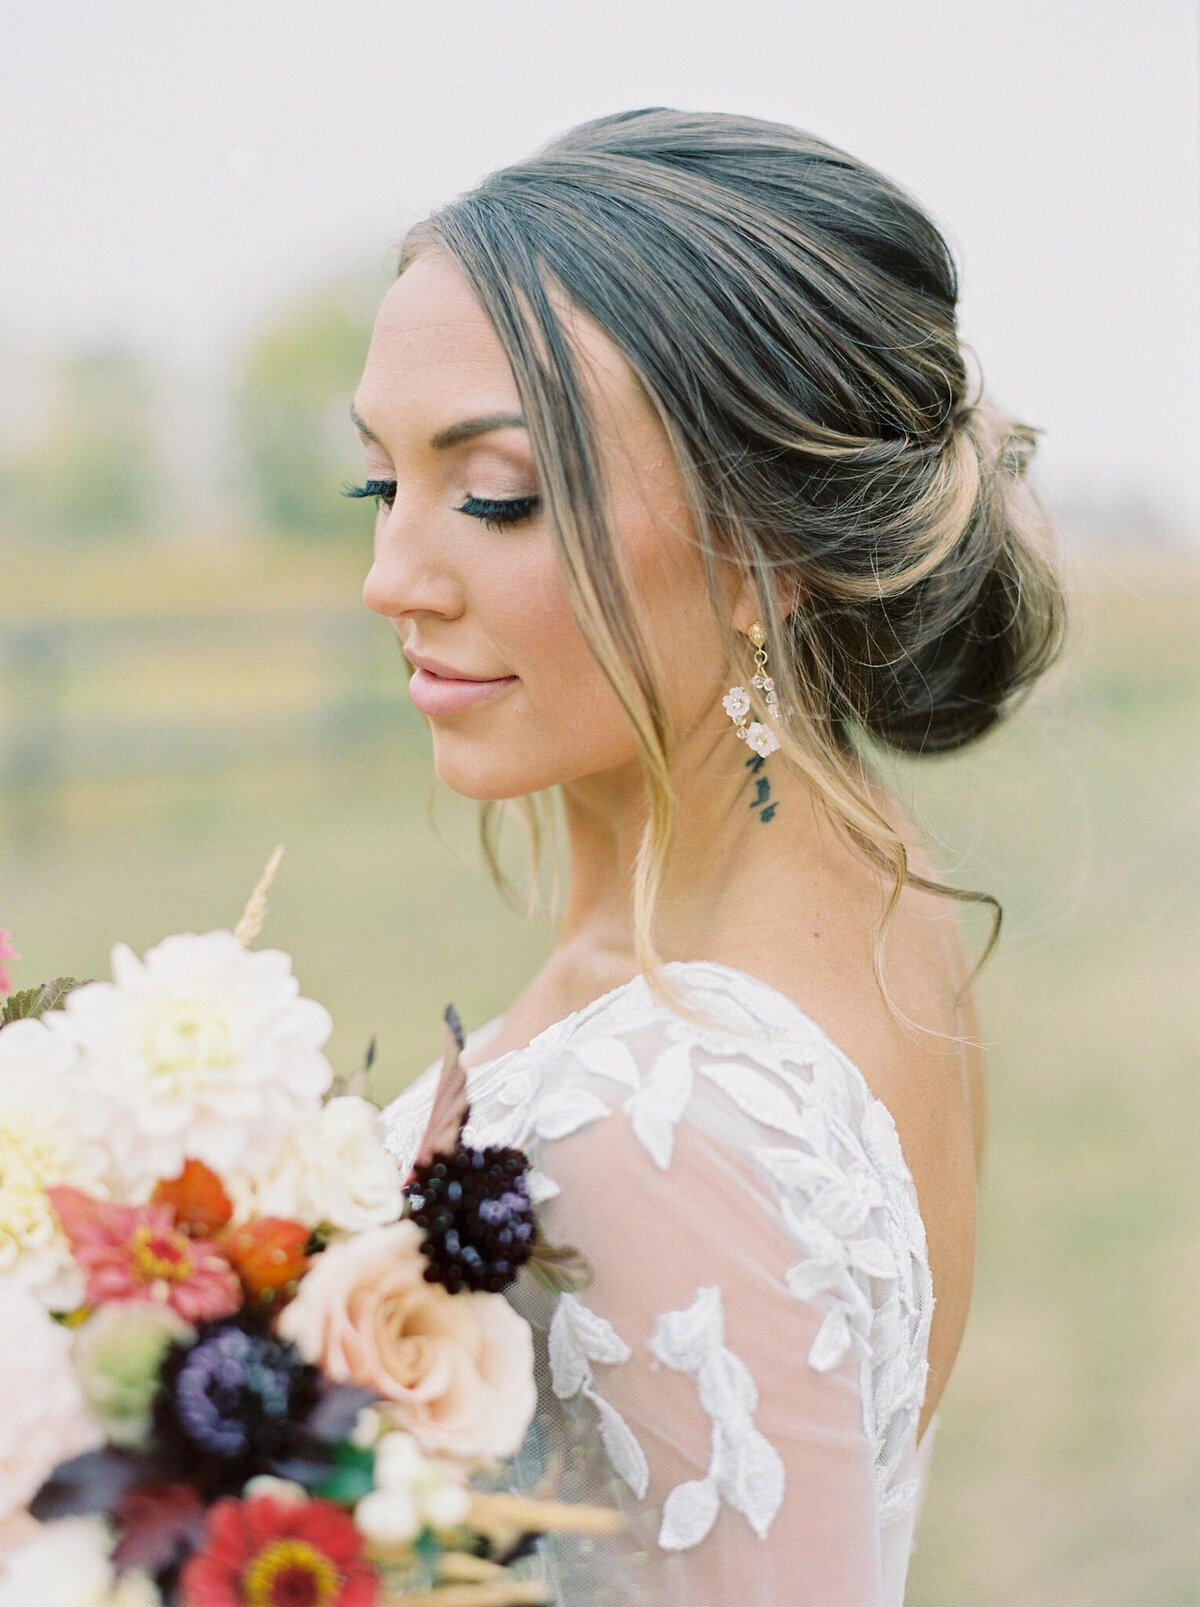 Classic and romantic bridal up-do by Madi Leigh Artistry, experienced and inclusive Calgary hair & makeup artist, featured on the Brontë Bride Vendor Guide.